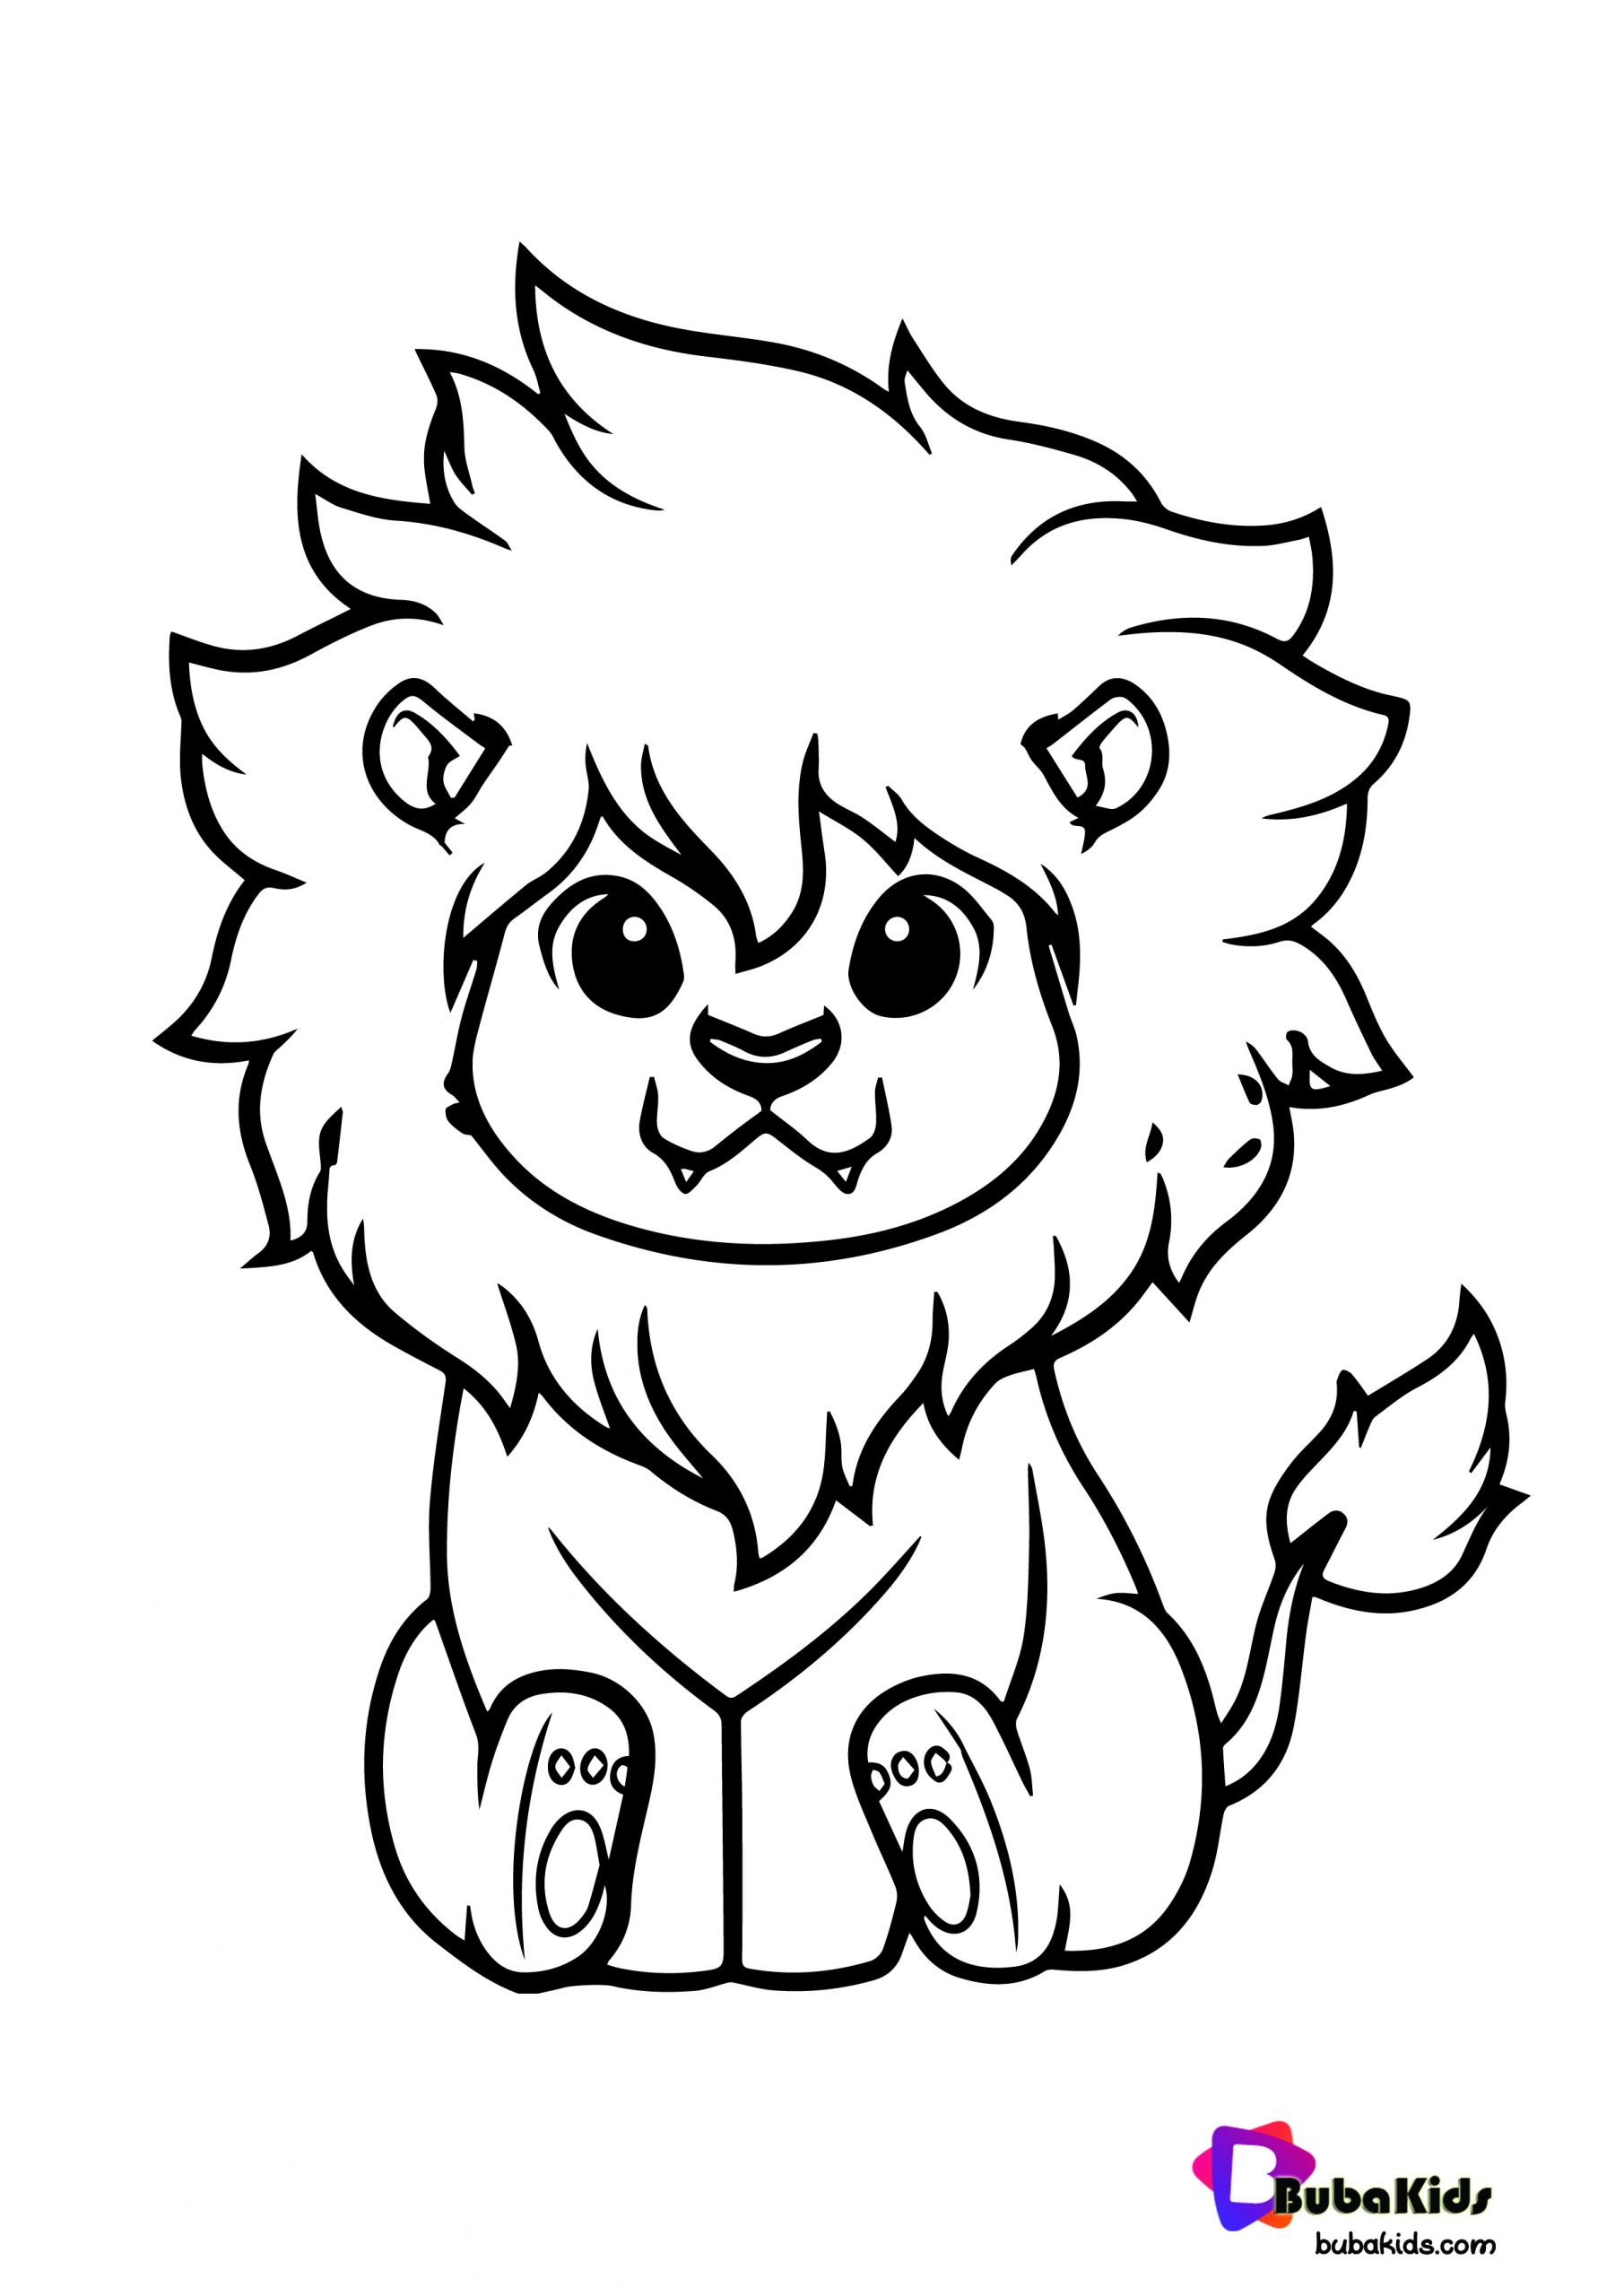 Cute Lion King Coloring Page